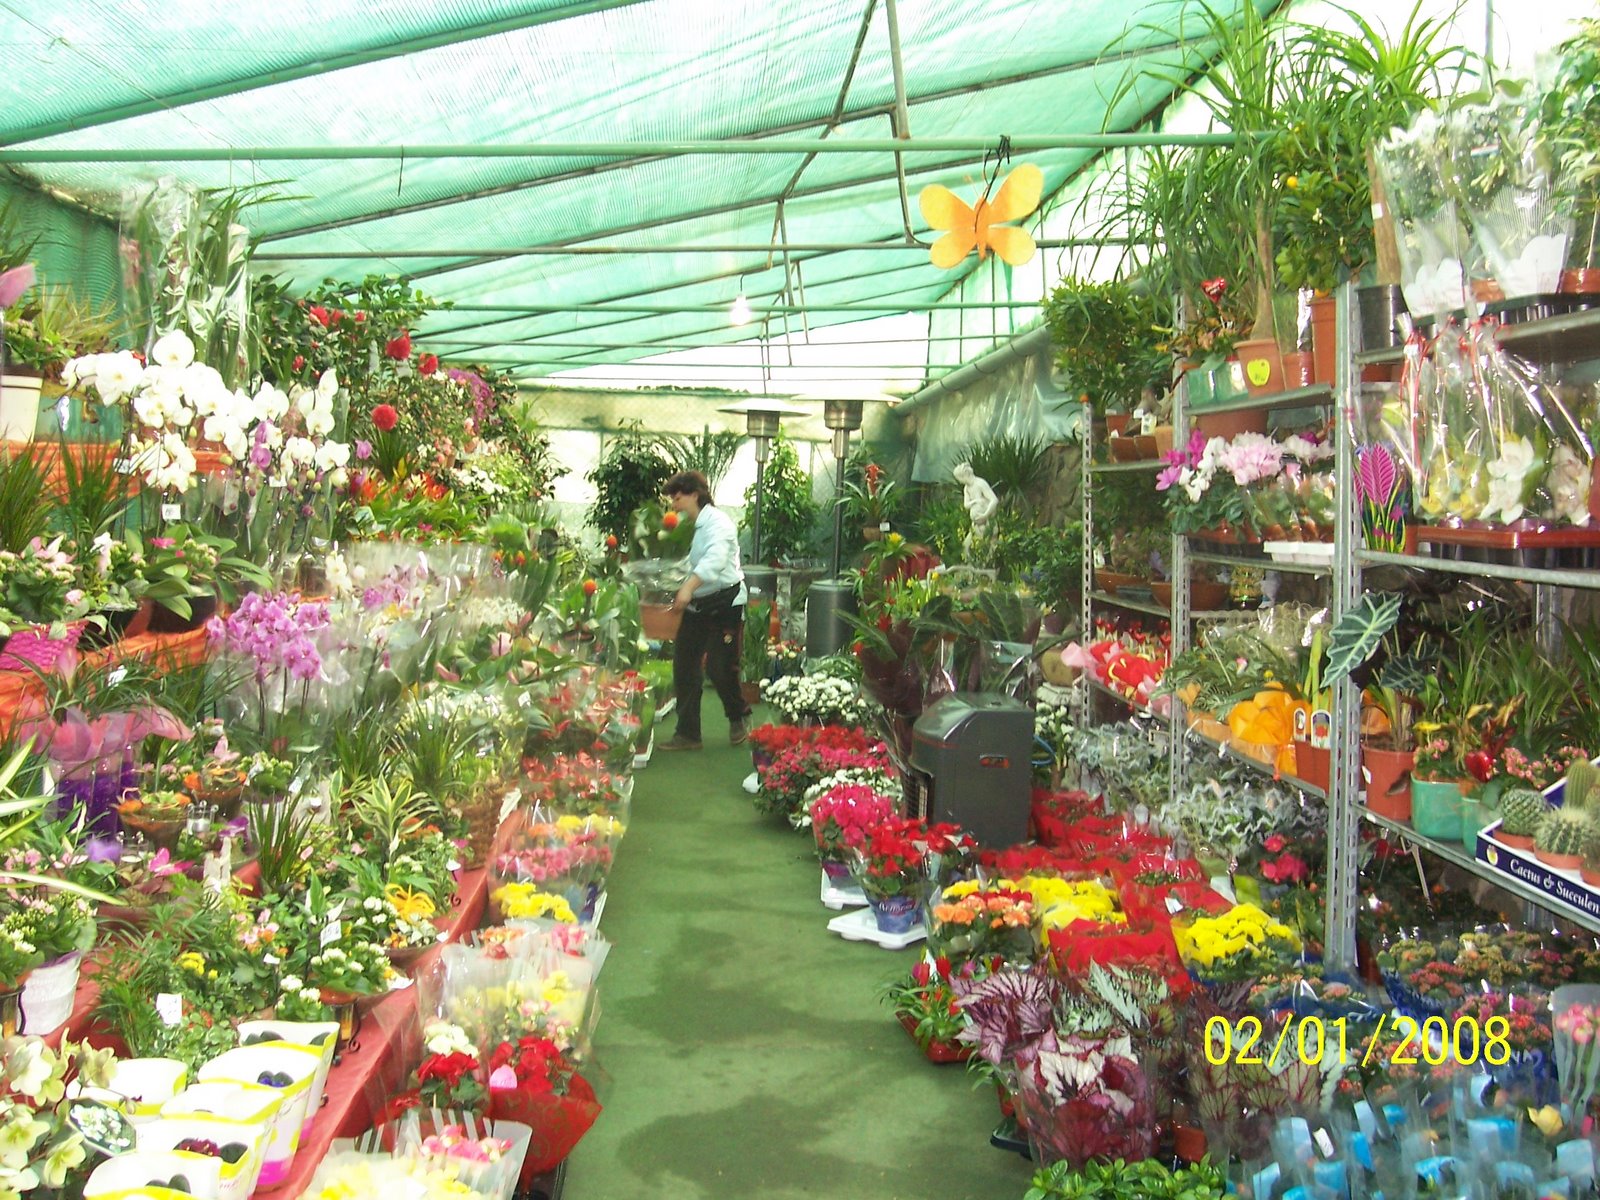 Flowers in the market